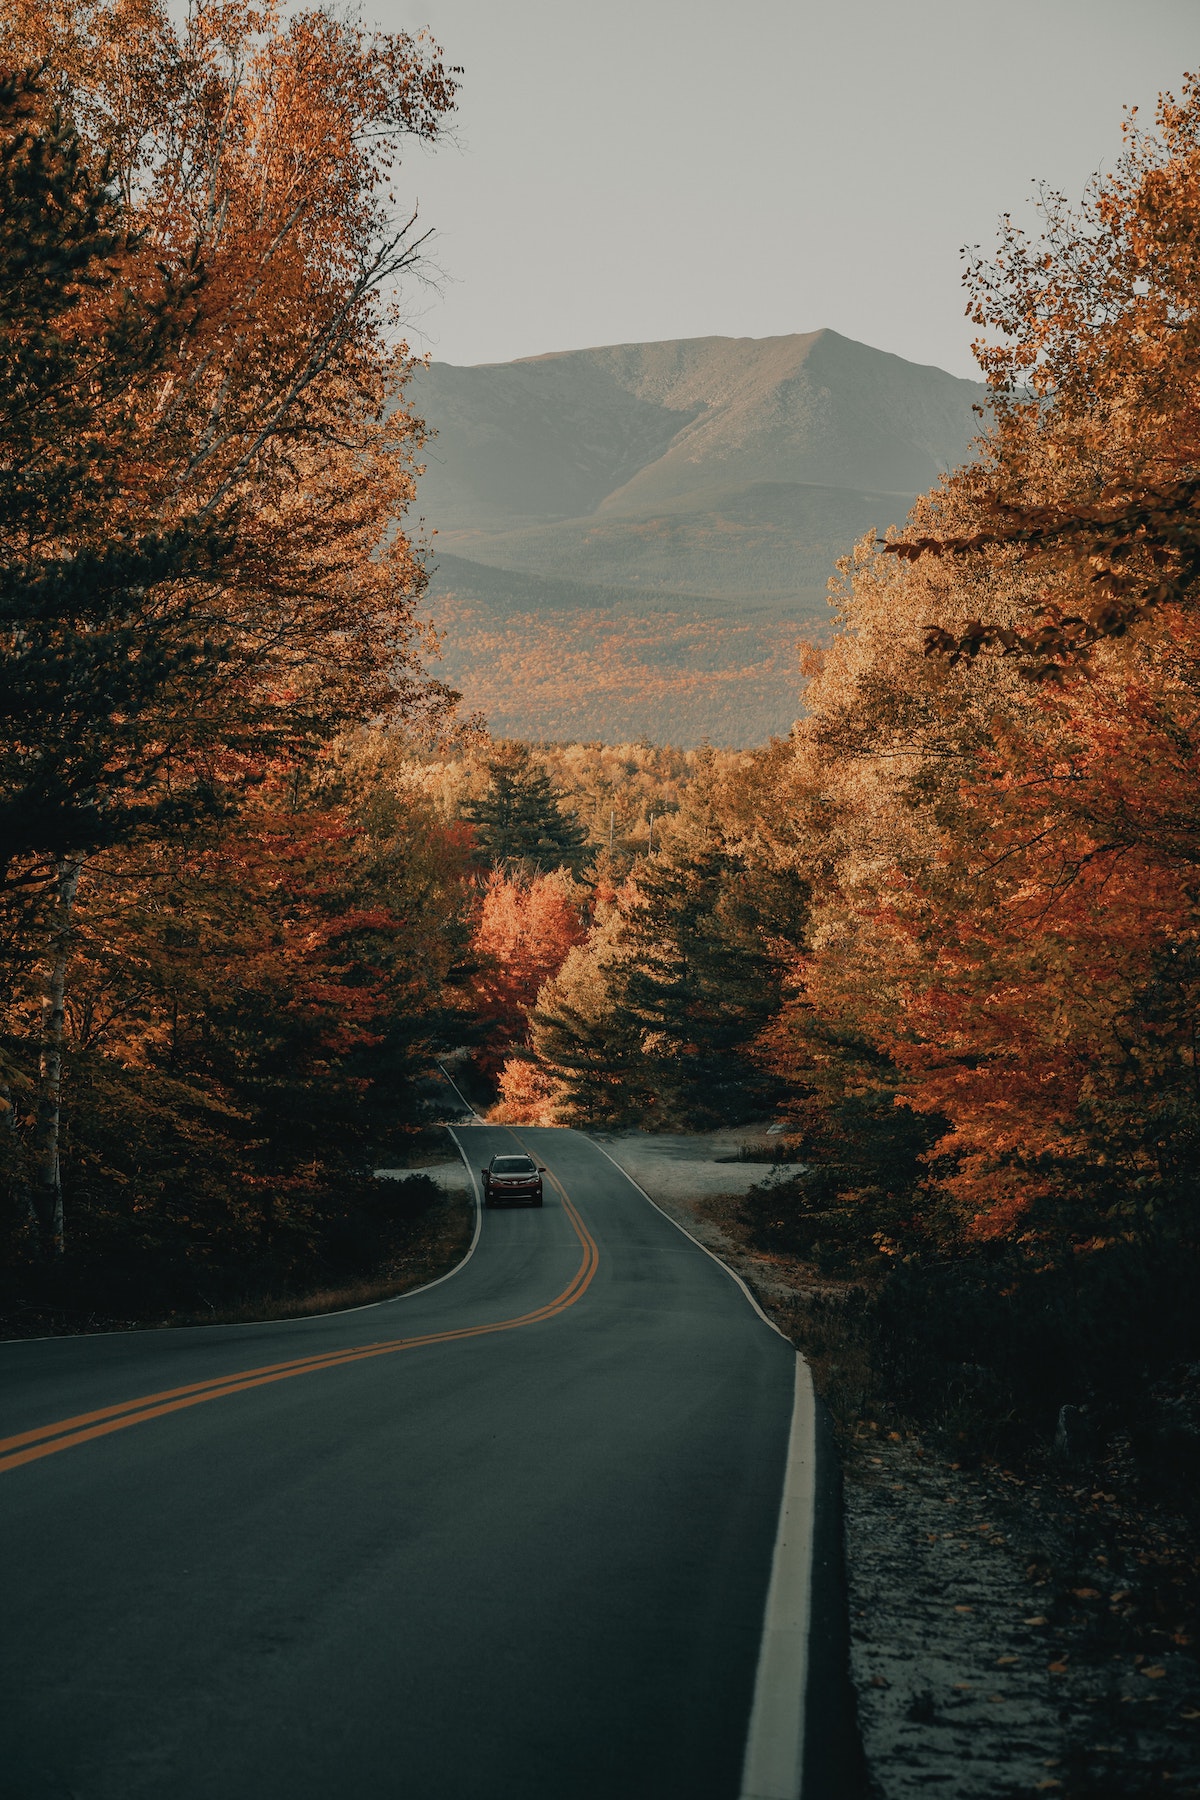 A car drives on a winding road with mountains in the background and trees with red and golden fall leaves lining the road